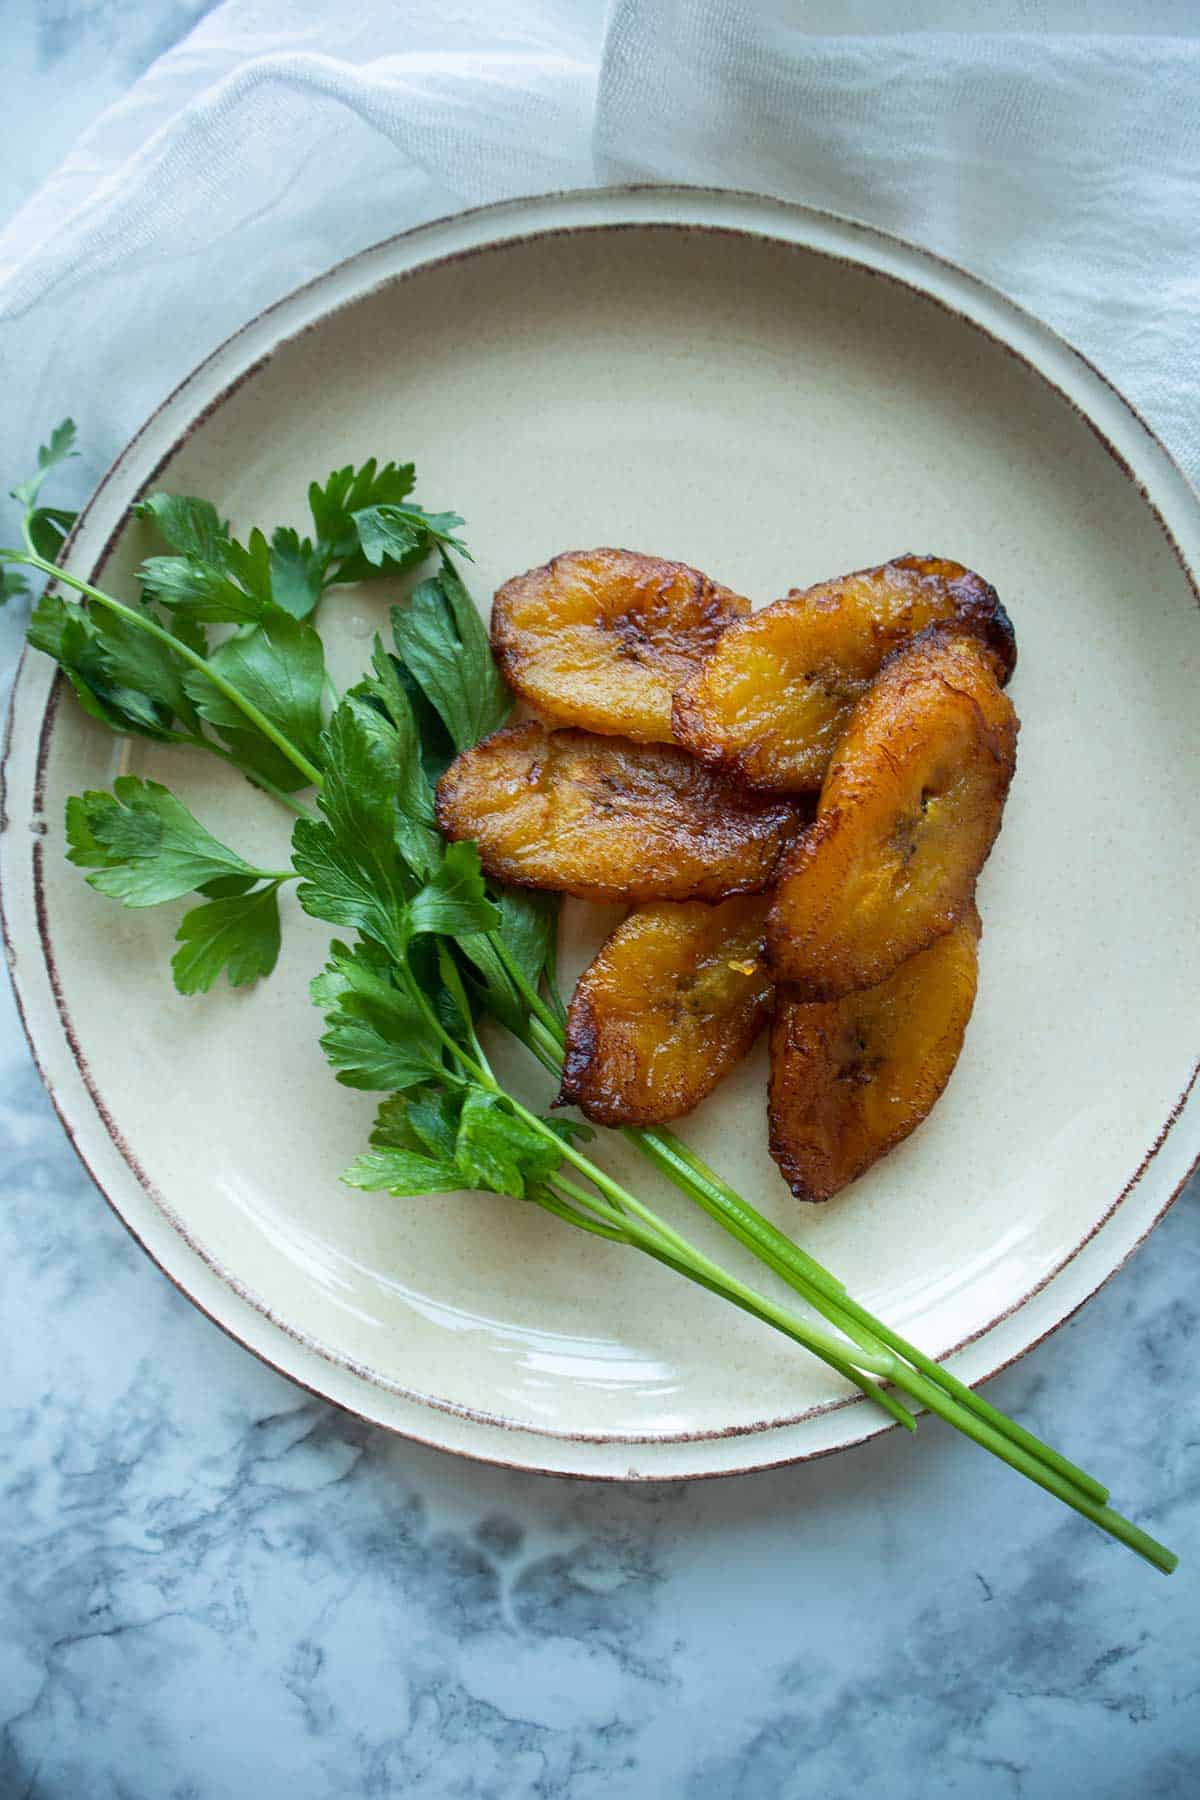 a plate with fried amarillos or fried plantains with parsley on a stem.